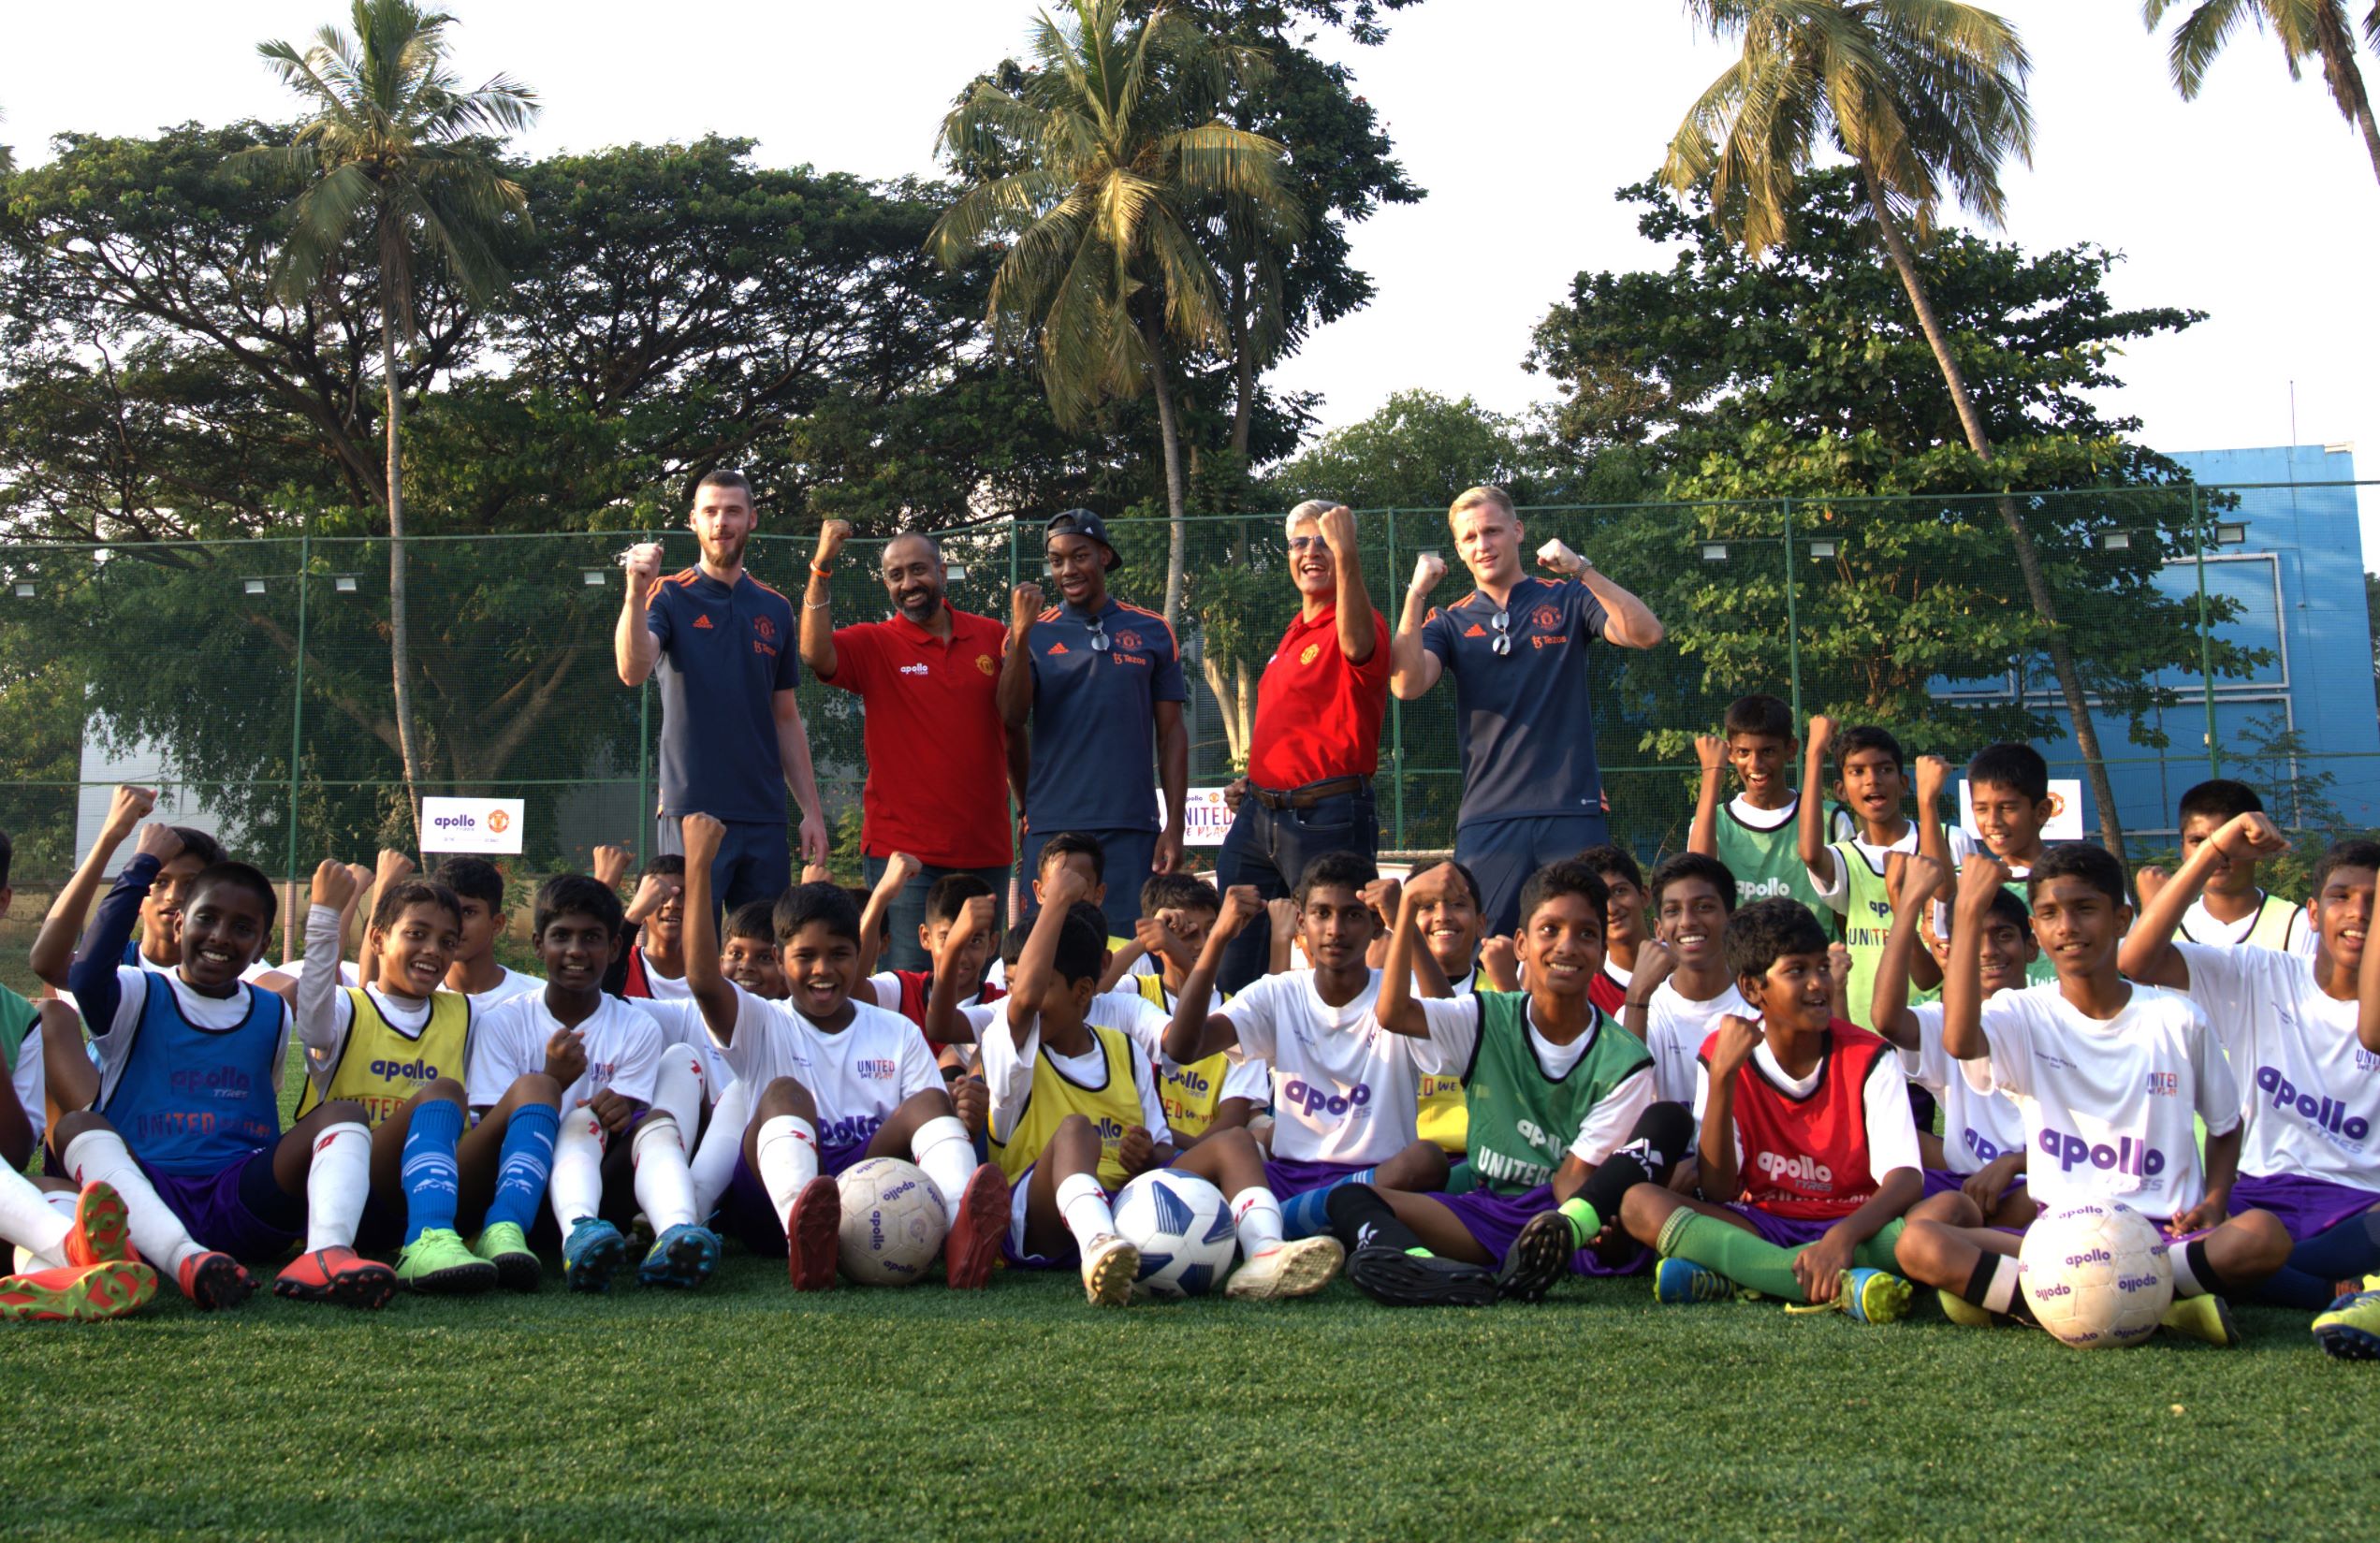 Apollo Tyres and Manchester United announce third edition of United We Play programme